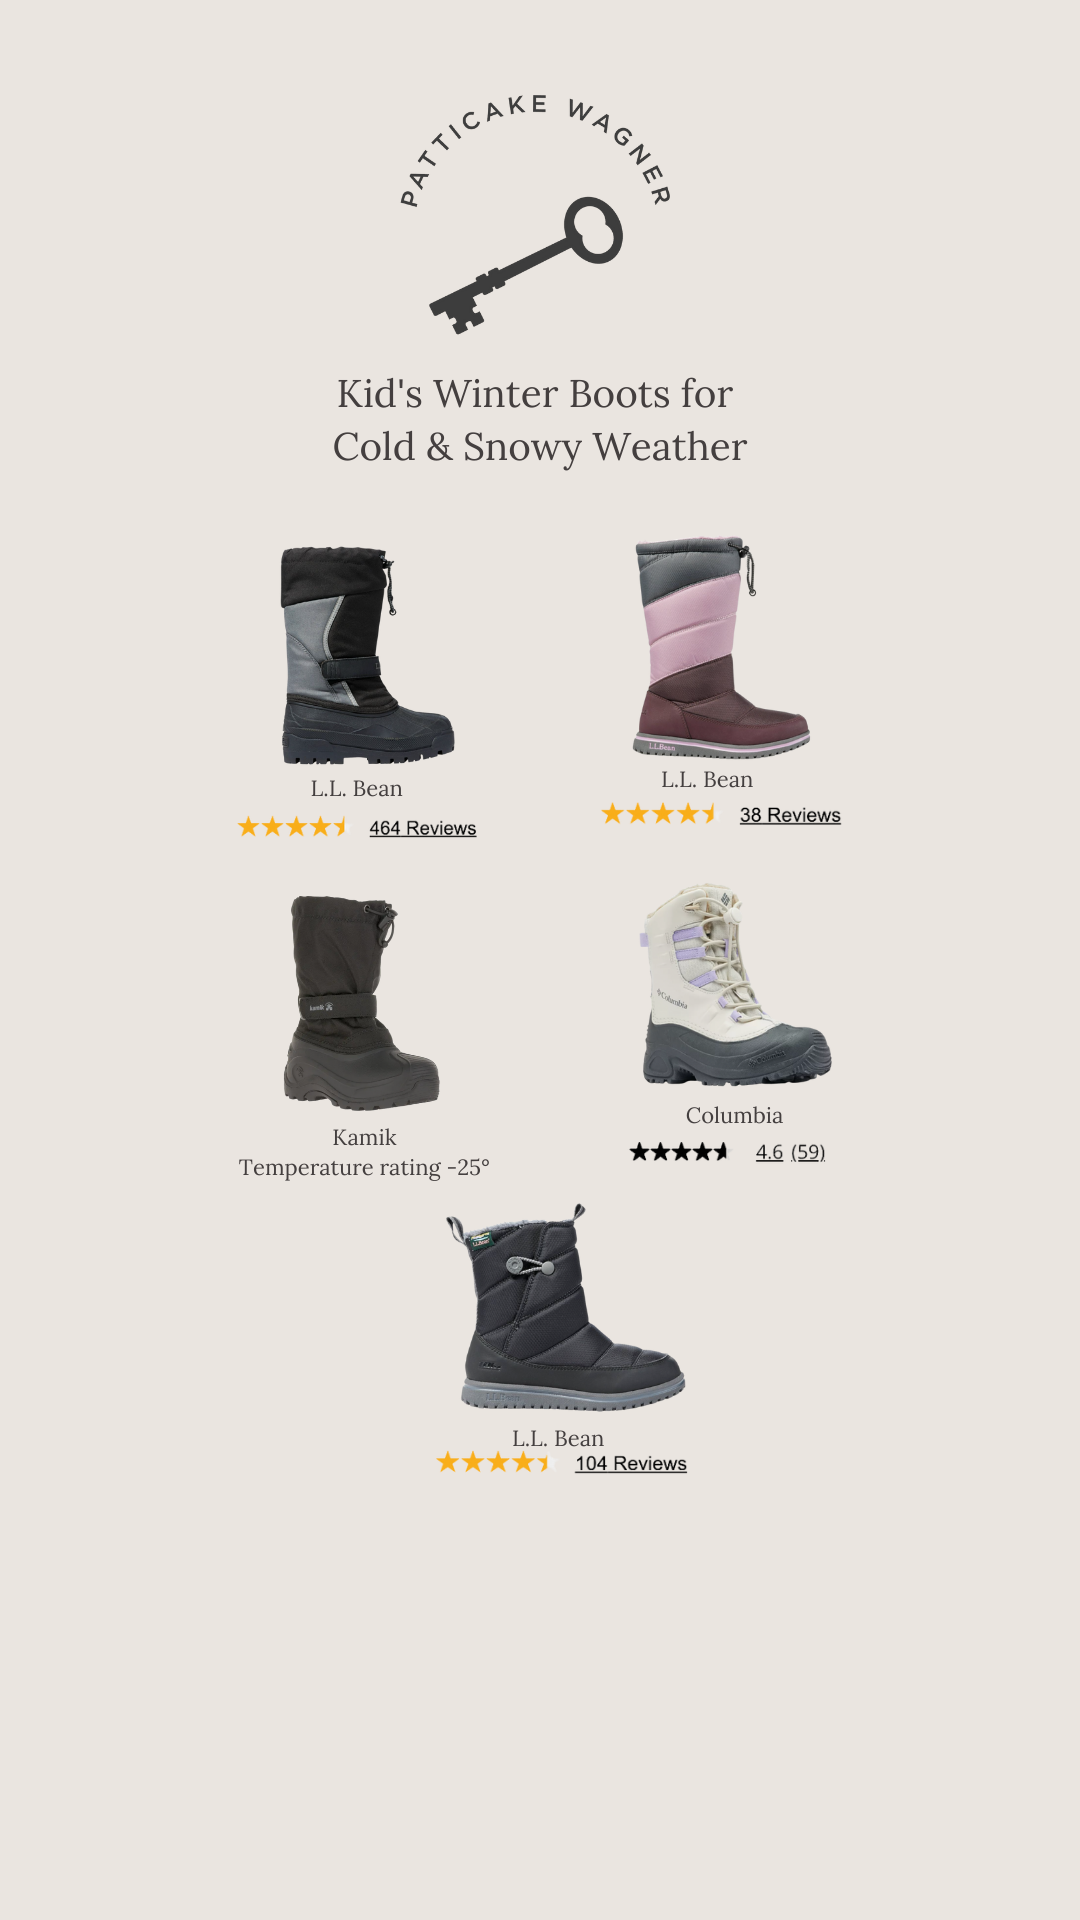 Warmest Winter Boots for Cold - & Wagner Snowy Climates Patticake